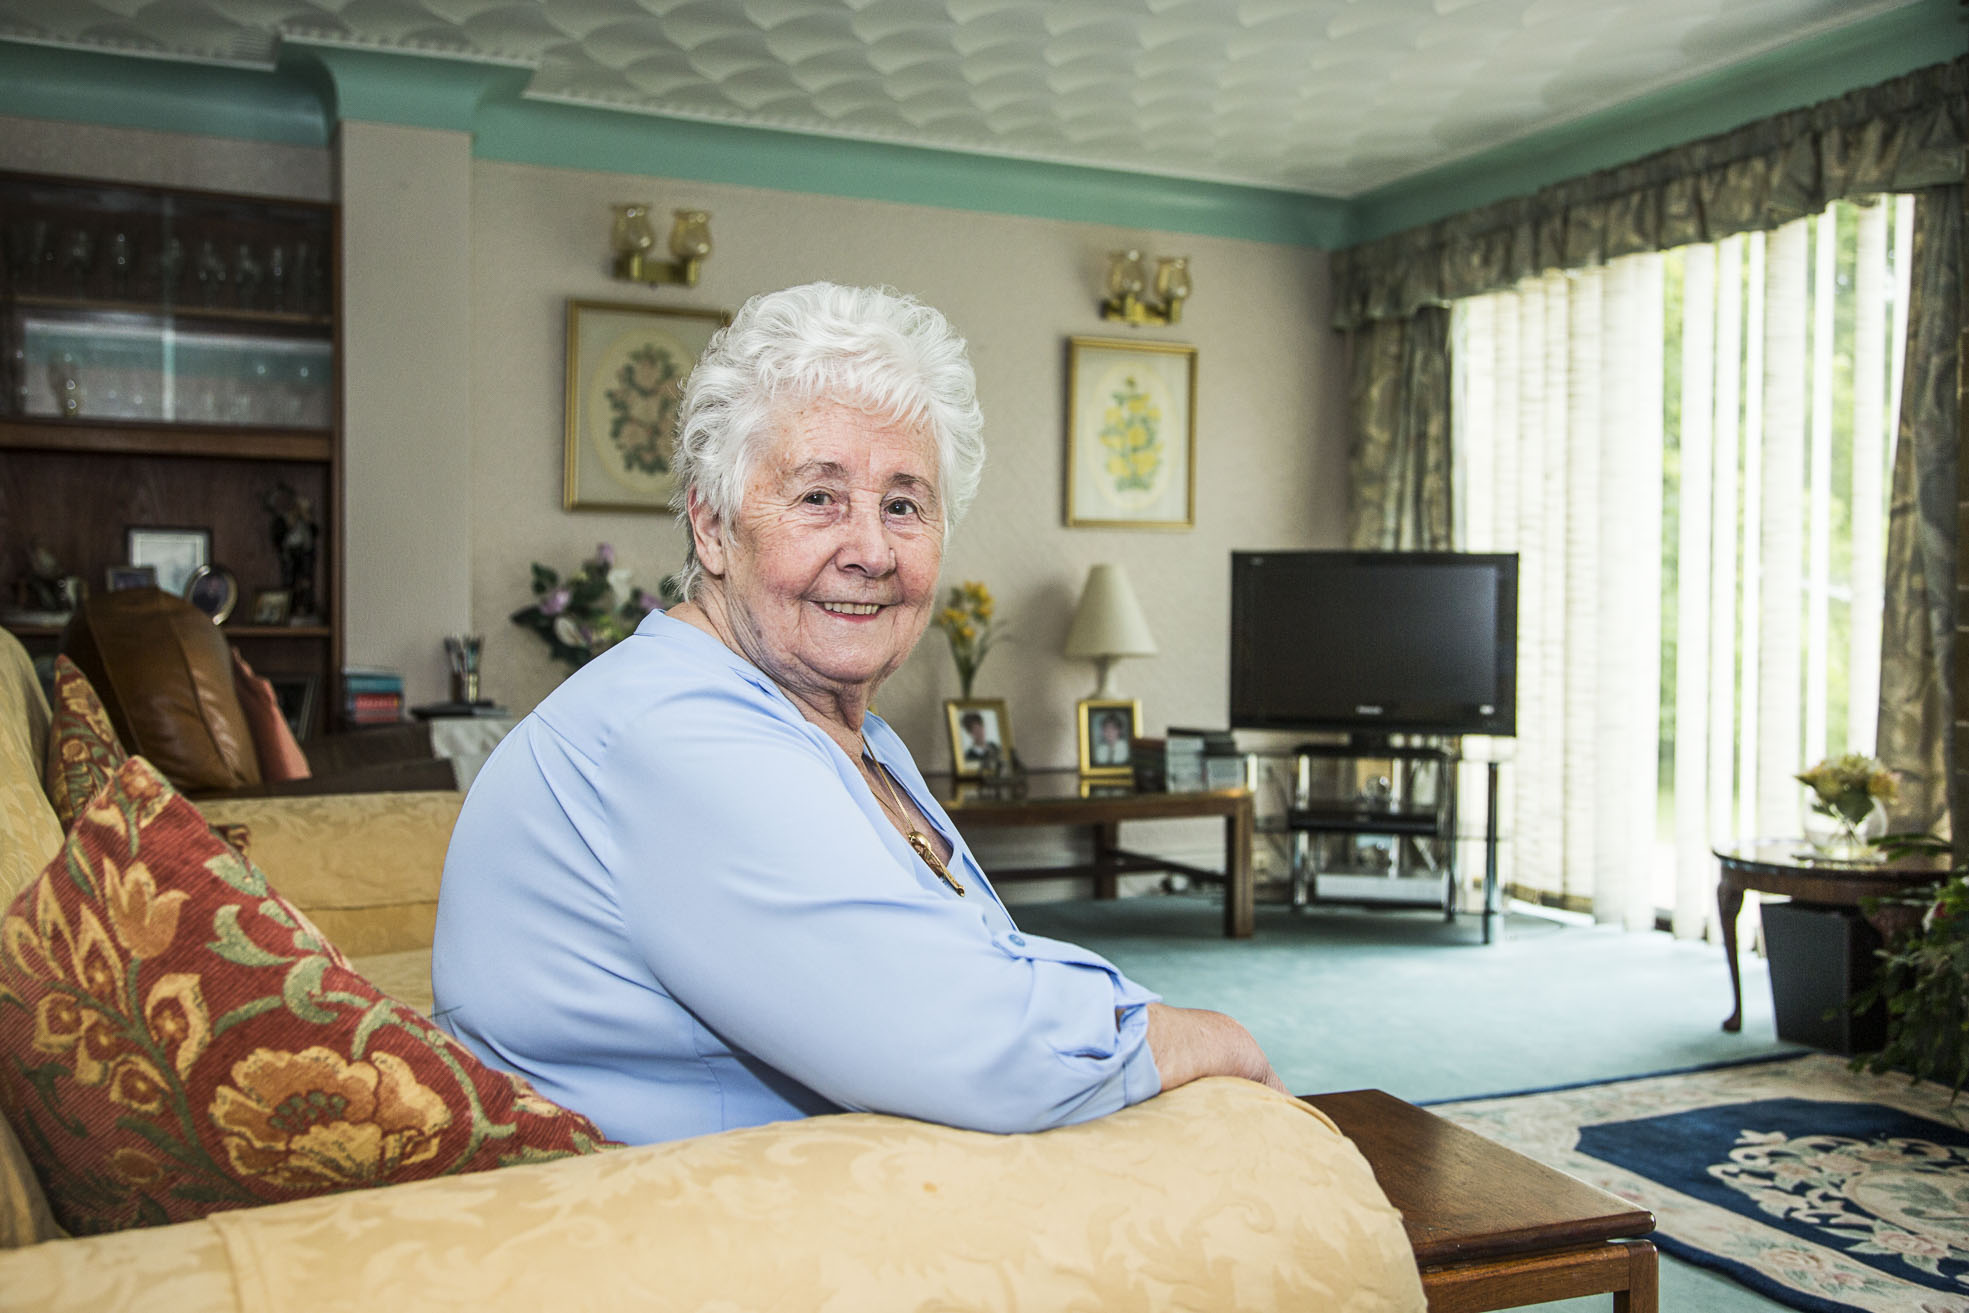 Bronwen, 77, is oldest care home manager in Wales – and she’s in line for top award